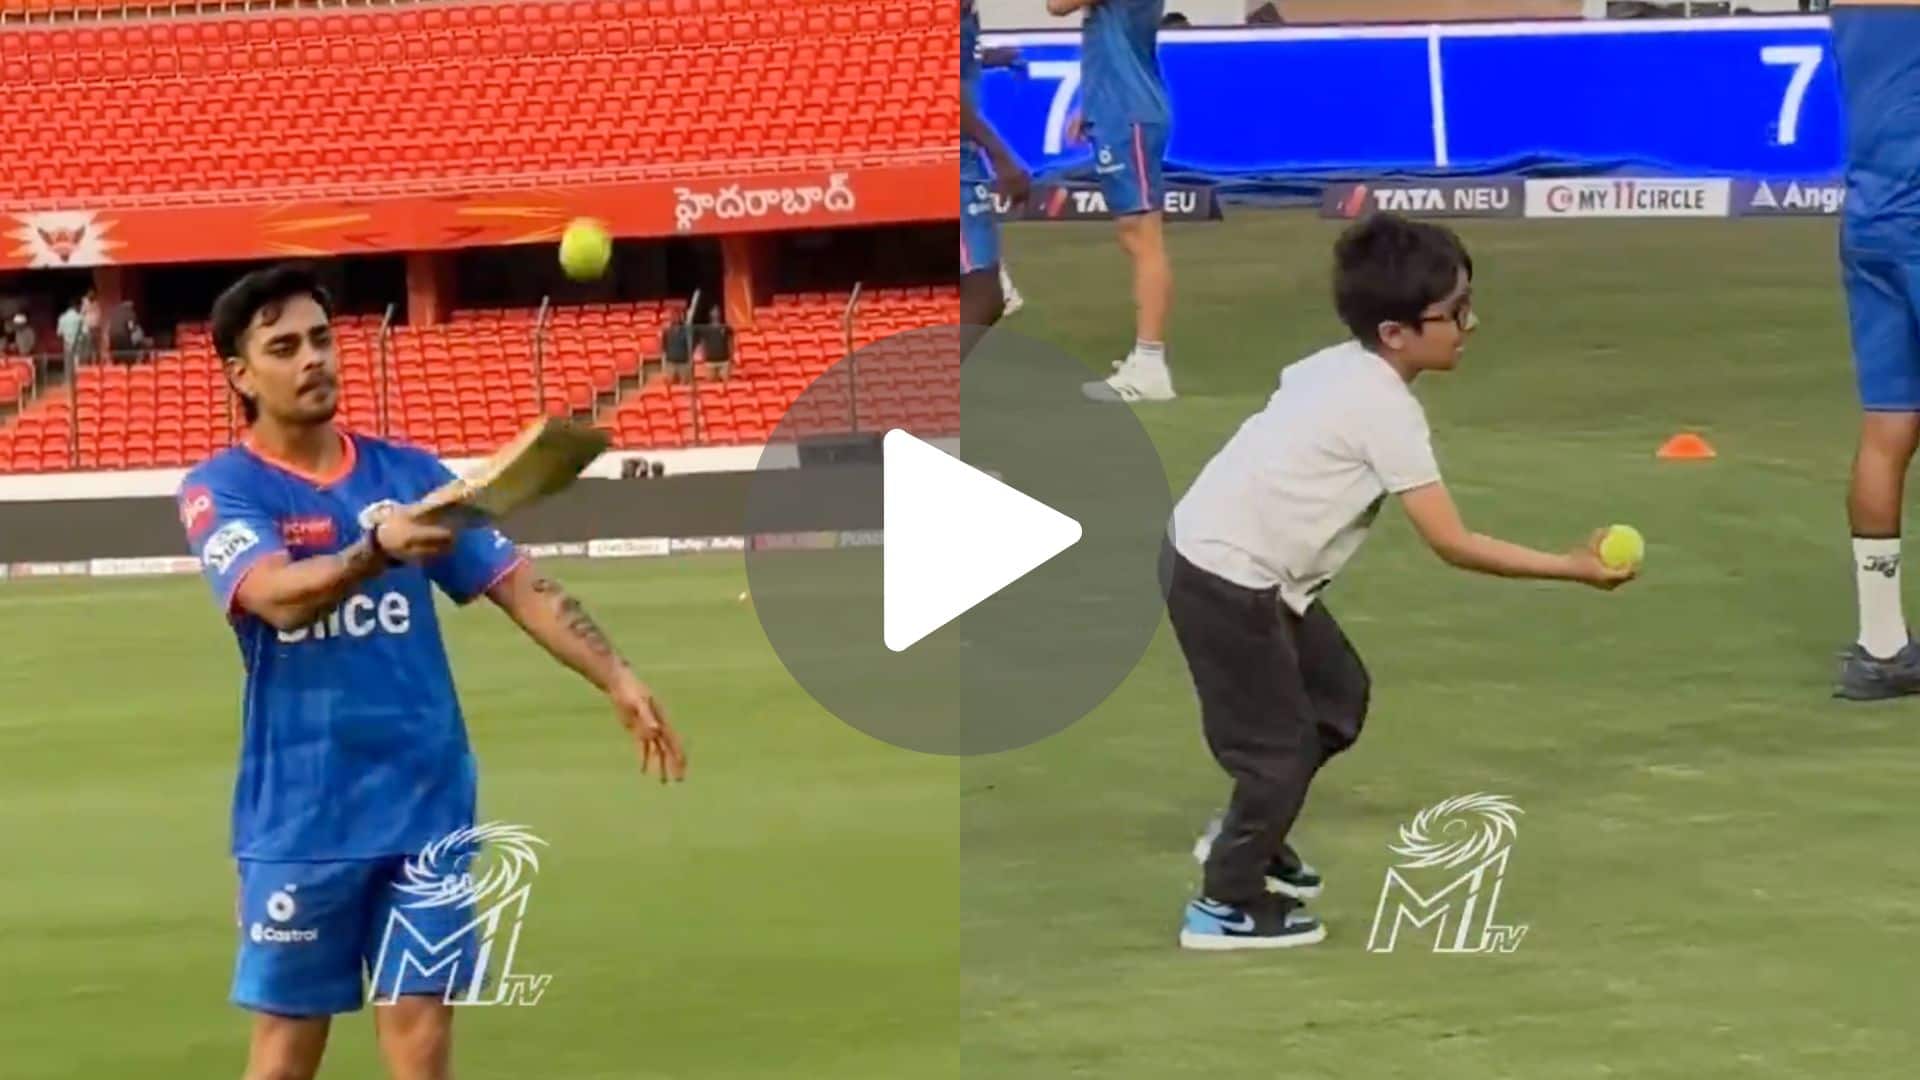 [Watch] Ishan Kishan Plays With Piyush Chawla's Son In A Wholesome Moment